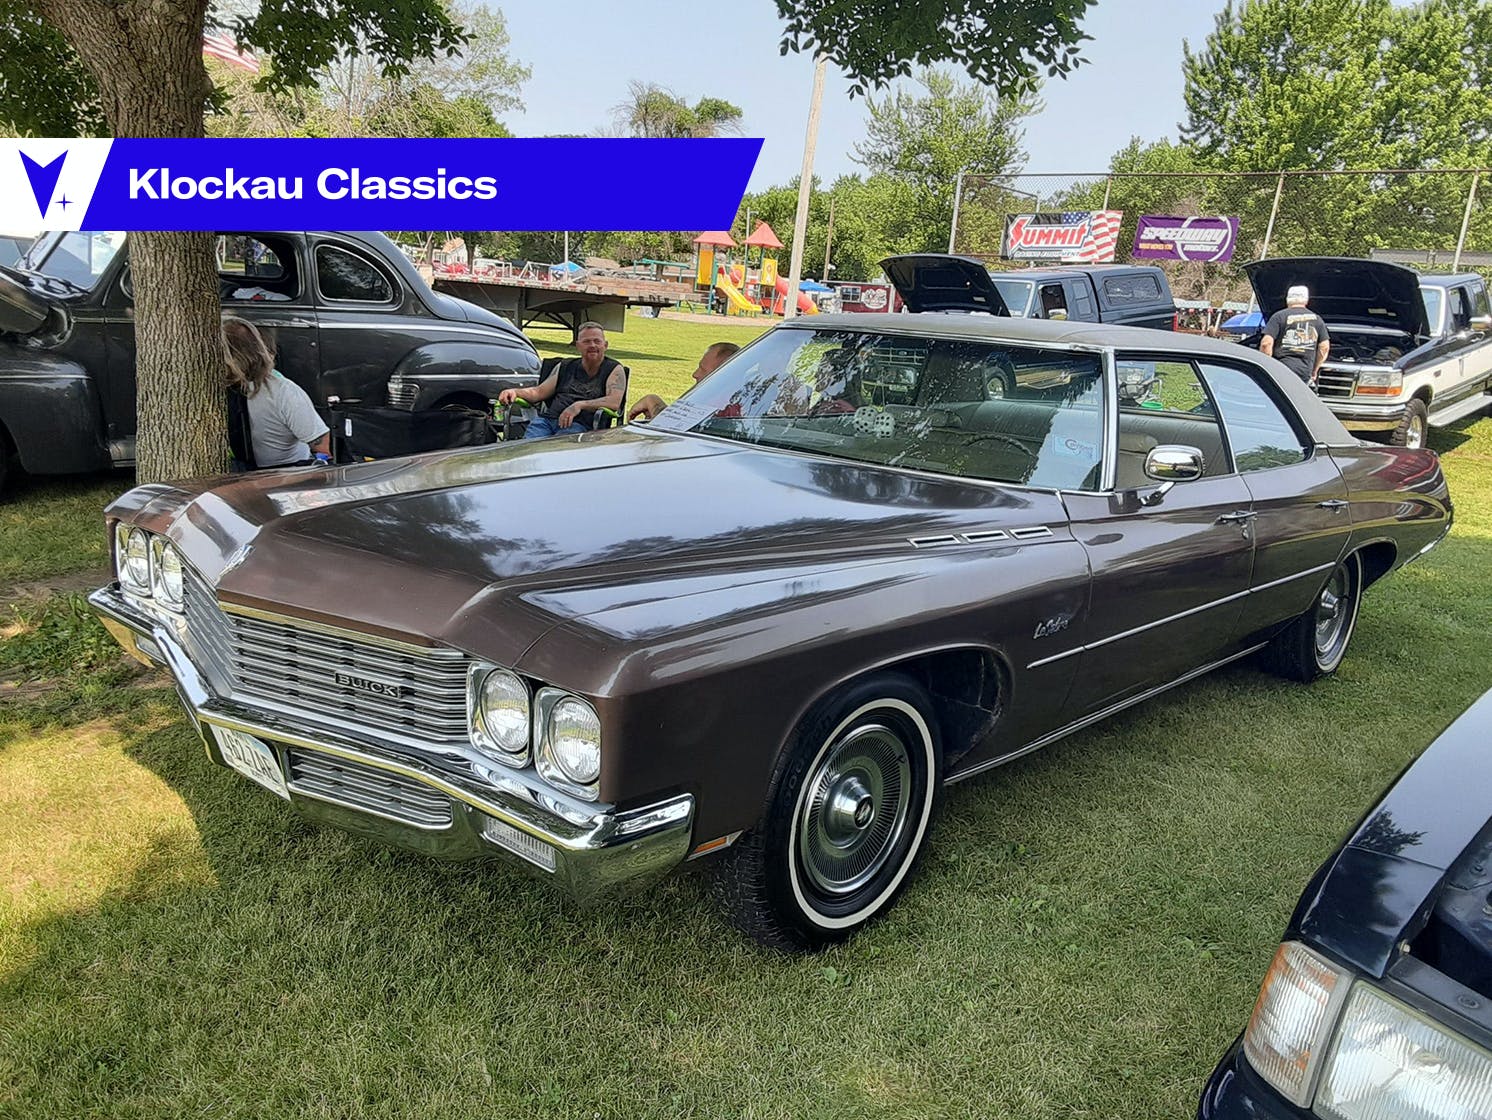 1971 Buick LeSabre: Upper middle class, '71-style - Hagerty Media